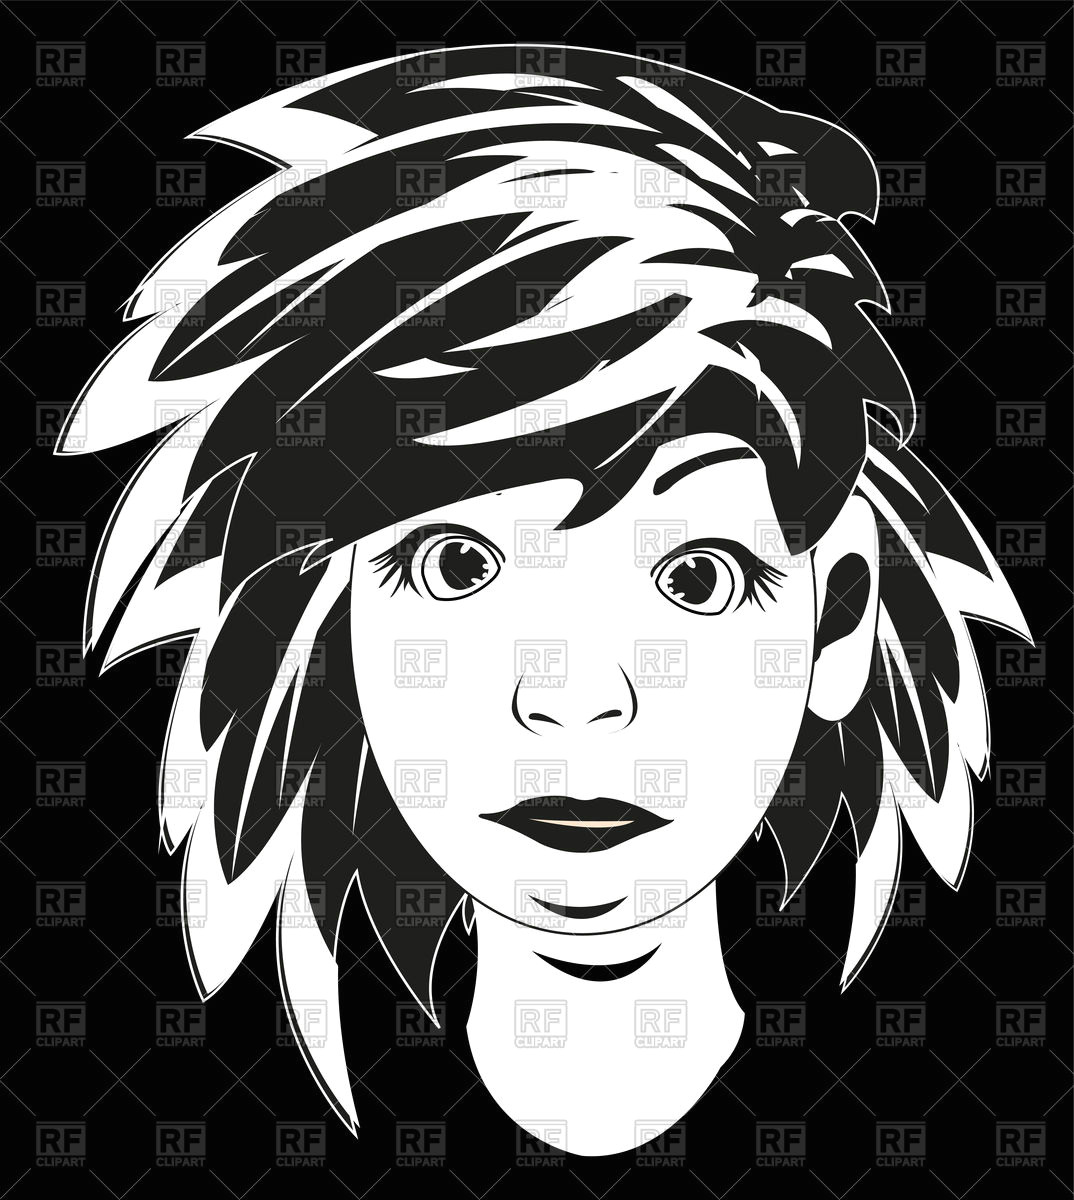 black white drawing girl vector image vector illustration of people a c cobol1964 170791 click to zoom